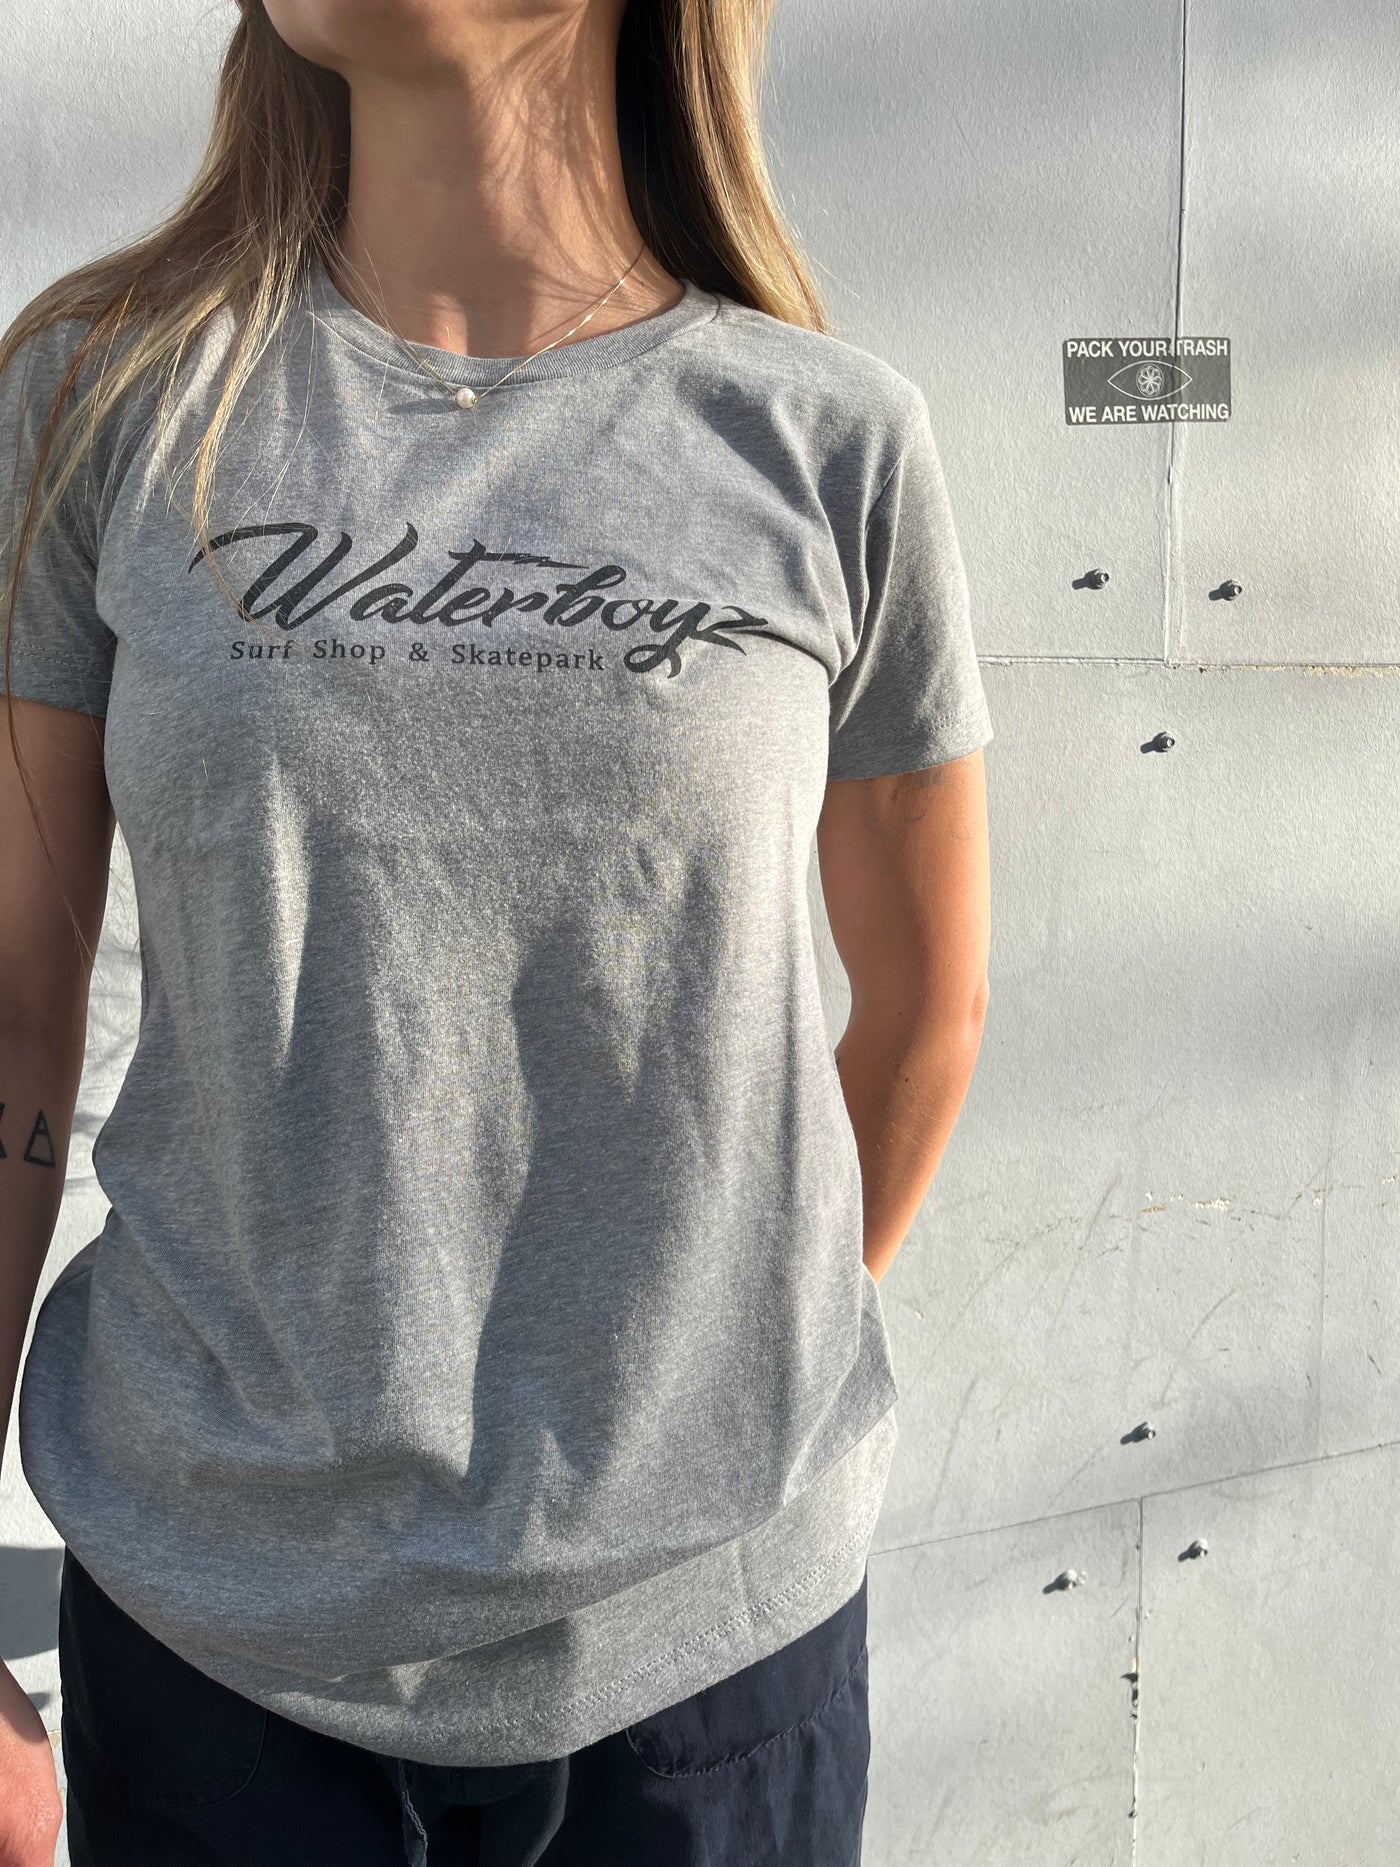 Waterboyz Girls Fitted Bolt S/S Tee